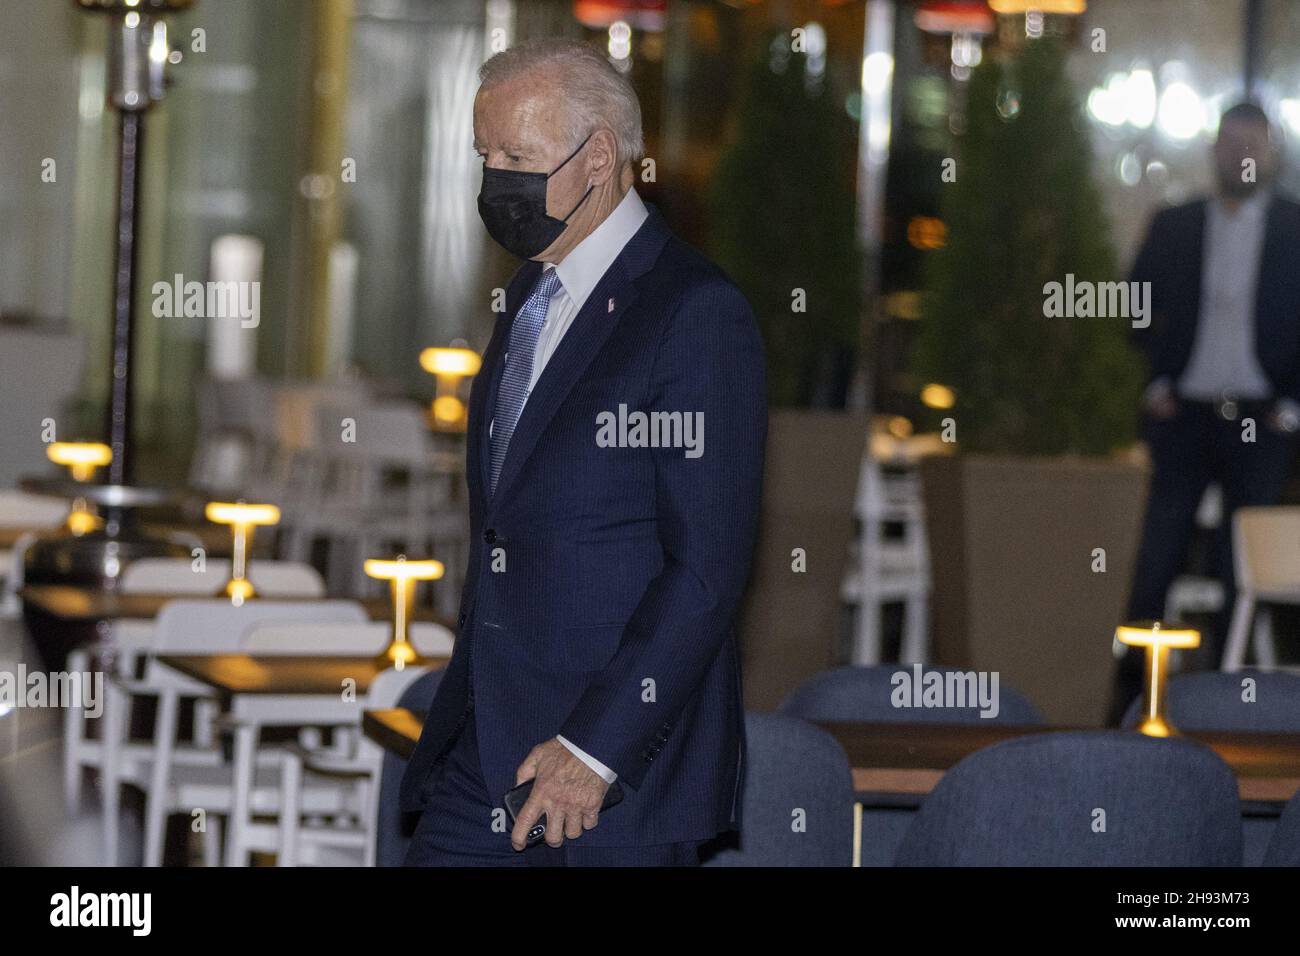 Washington DC, USA. 03rd Dec, 2021. President Joe Biden leaves Imperfecto after stopping by a family dinner in Washington, D.C. on Friday, December 3 2021. The President will spend The Weeknd at Camp David and return Sunday to attend the Kennedy Center Honors. Photo by Tasos Katopodis/Pool/ABACAPRESS.COM Credit: Abaca Press/Alamy Live News Stock Photo